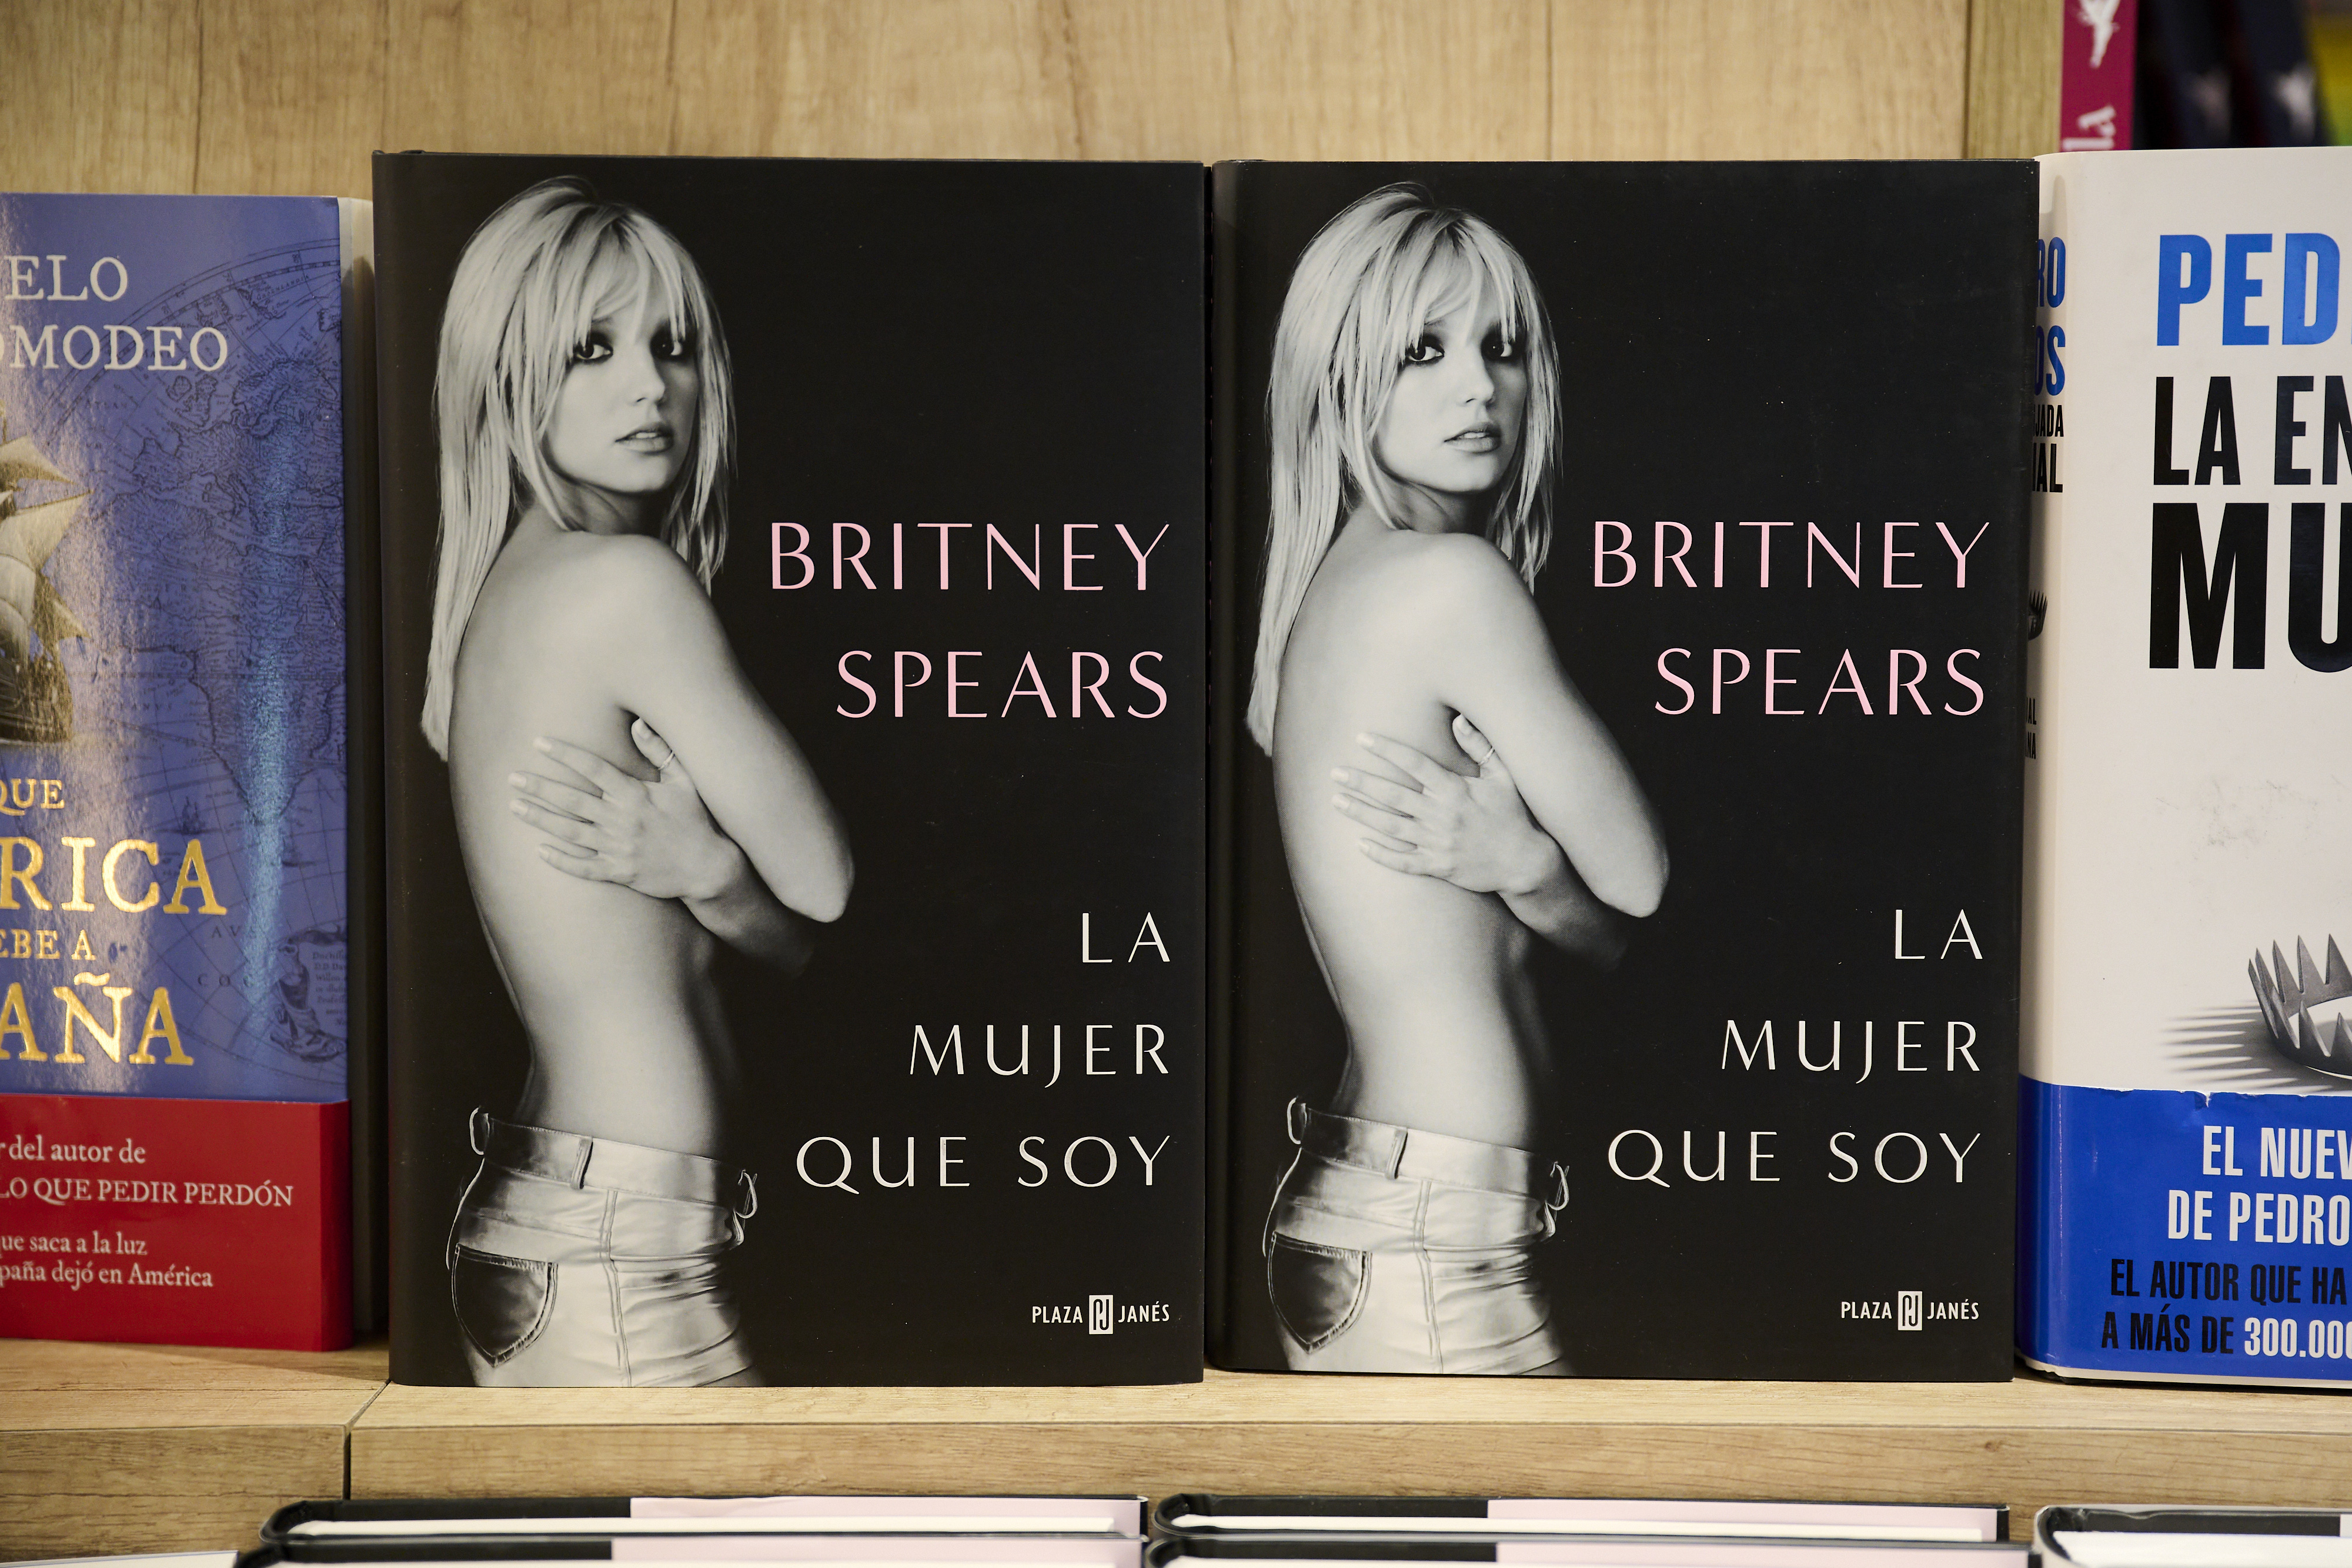 Two books titled &#x27;Britney Spears: LA MUJER QUE SOY&#x27; on a shelf